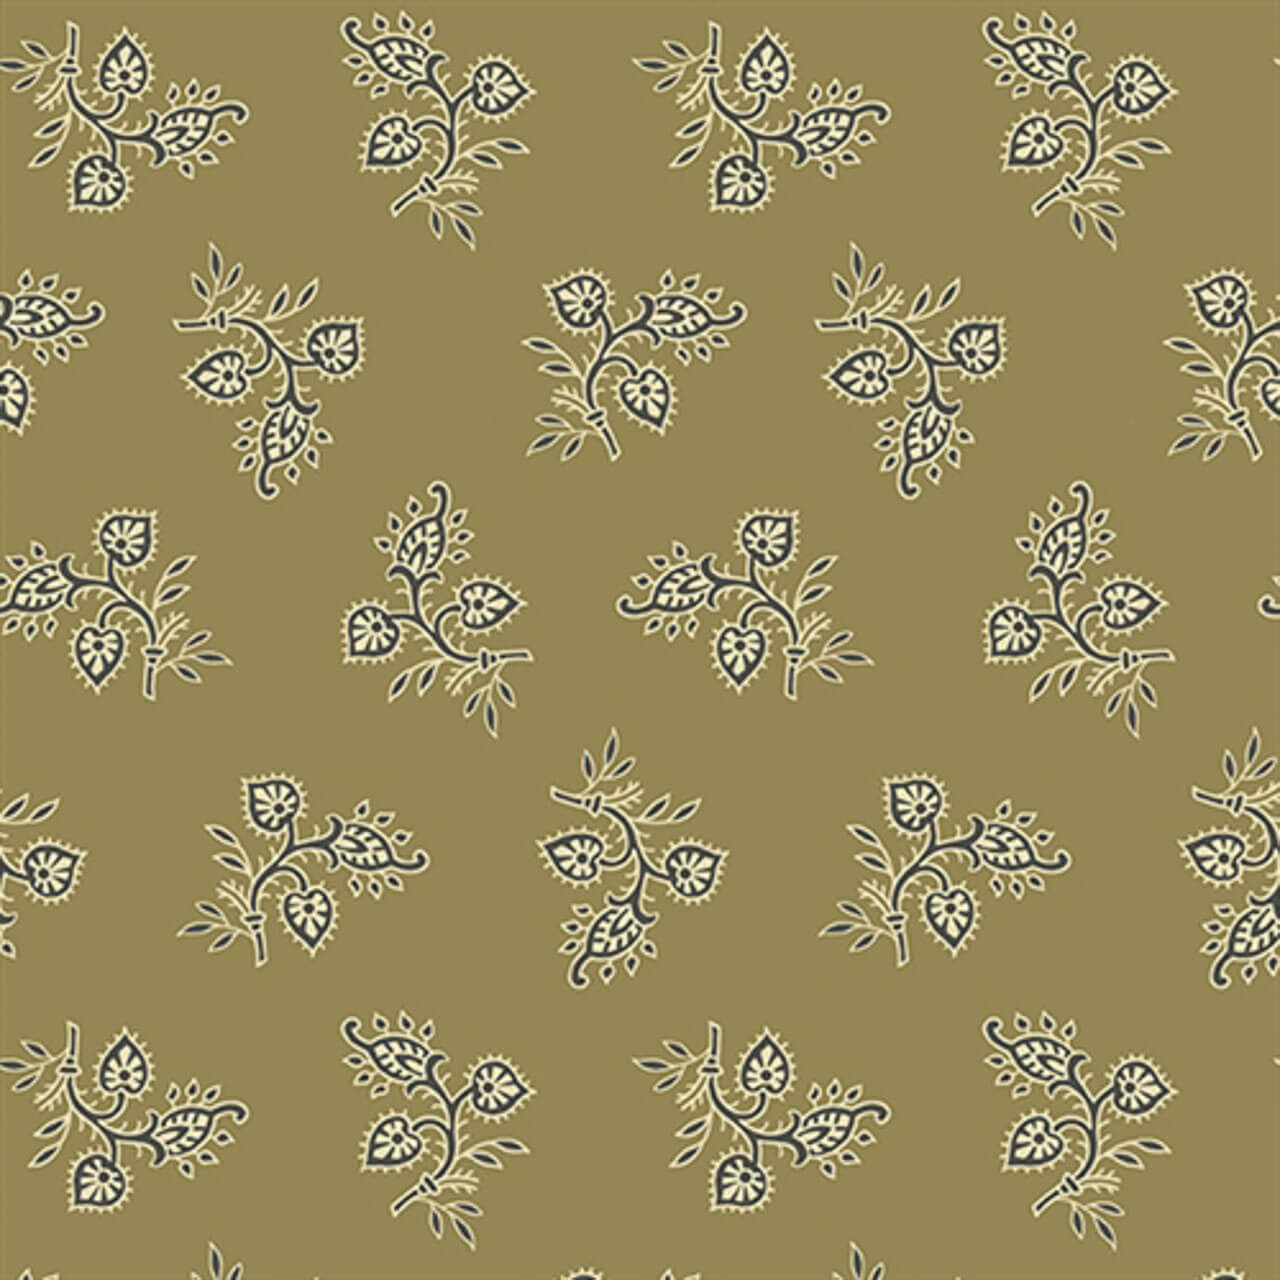 Andover's Leaf Lace Bronze Green fabric from the Veranda collection, featuring khaki green intricate lace patterns on 100% cotton.